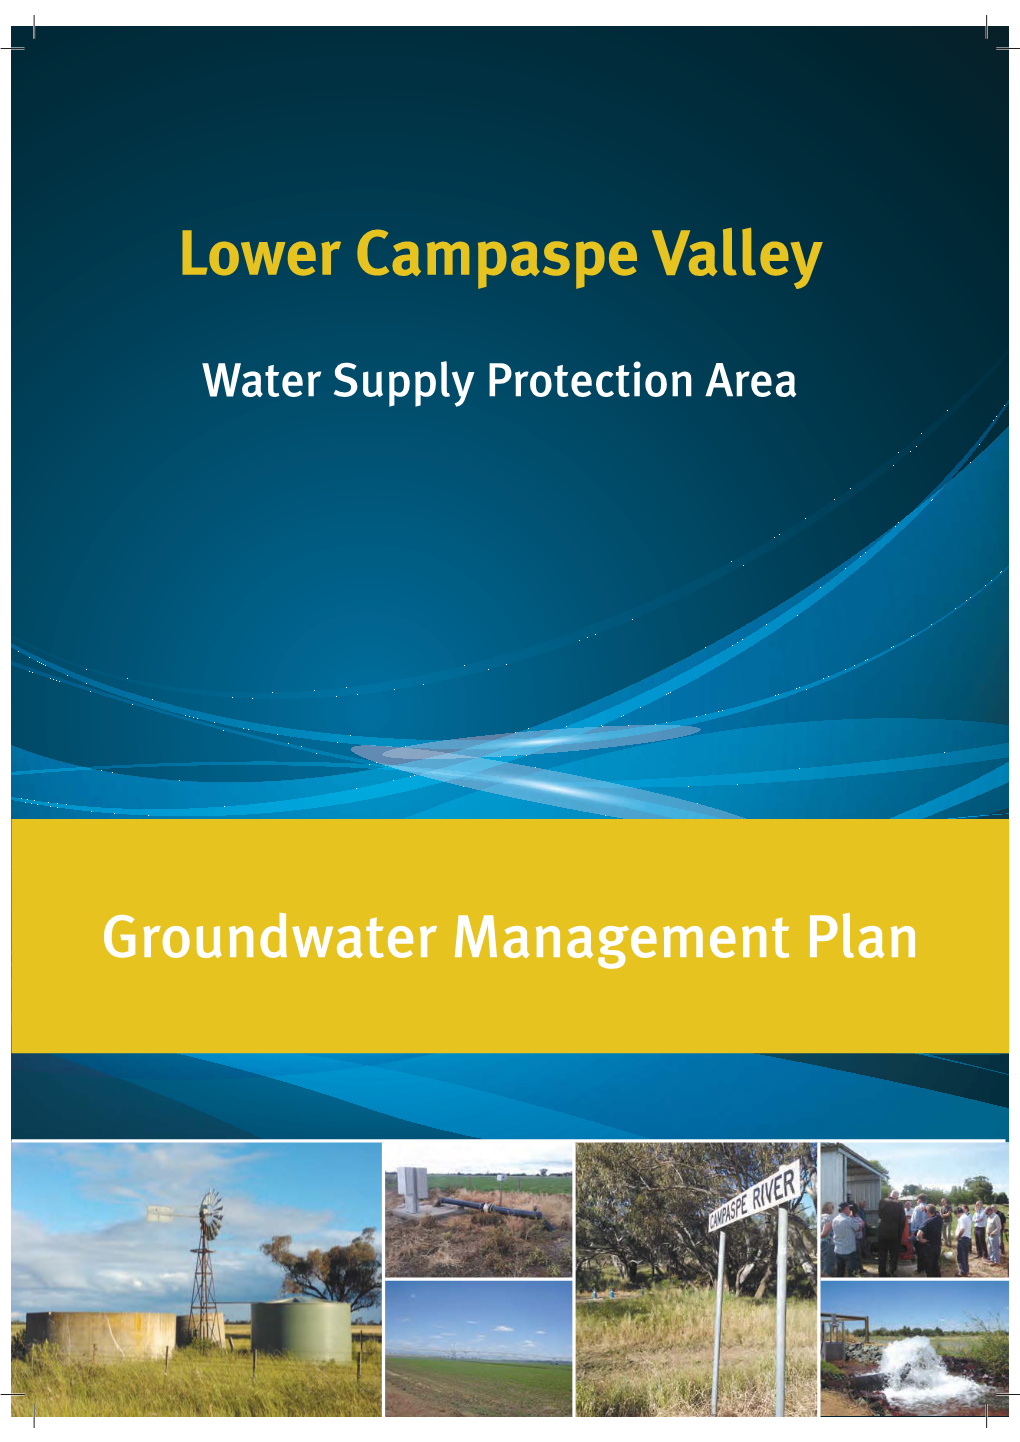 Lower Campaspe Valley WSPA Groundwater Management Plan